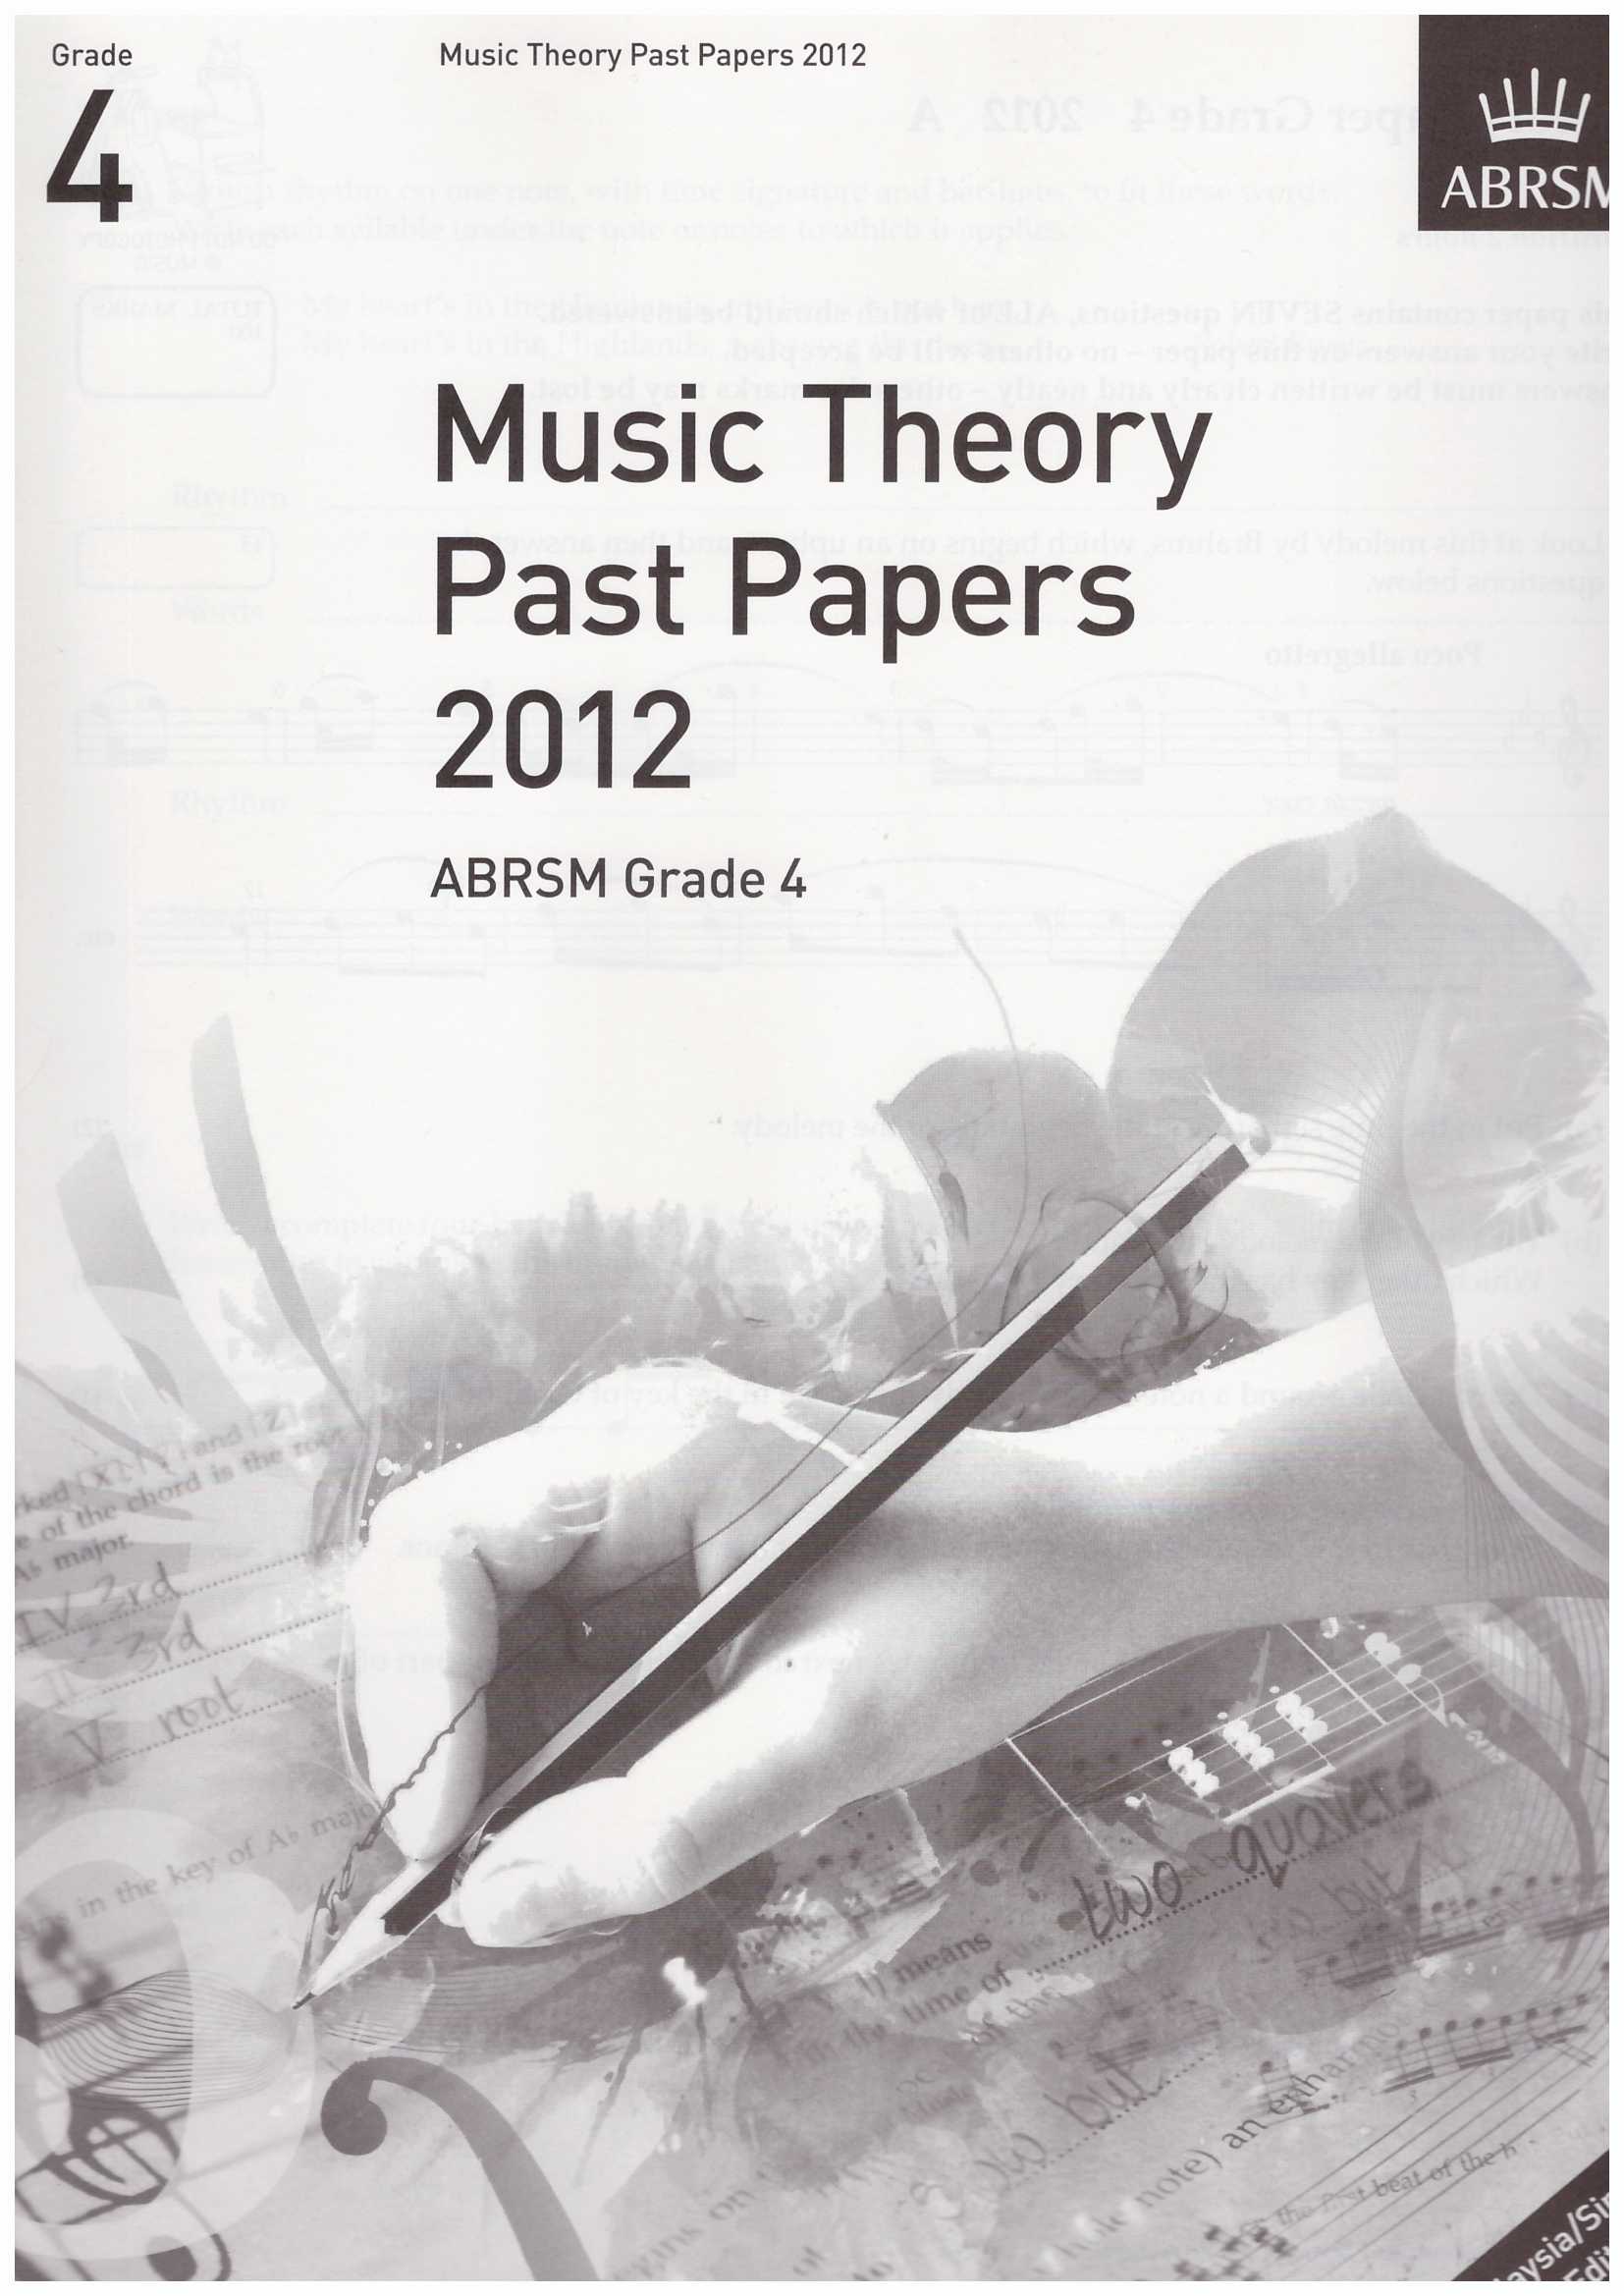 ABRSM Music Theory Practice Papers 2012 Grade 4 / Theory Paper / Theory Exam Paper / Theory Past Year Paper / Past Paper